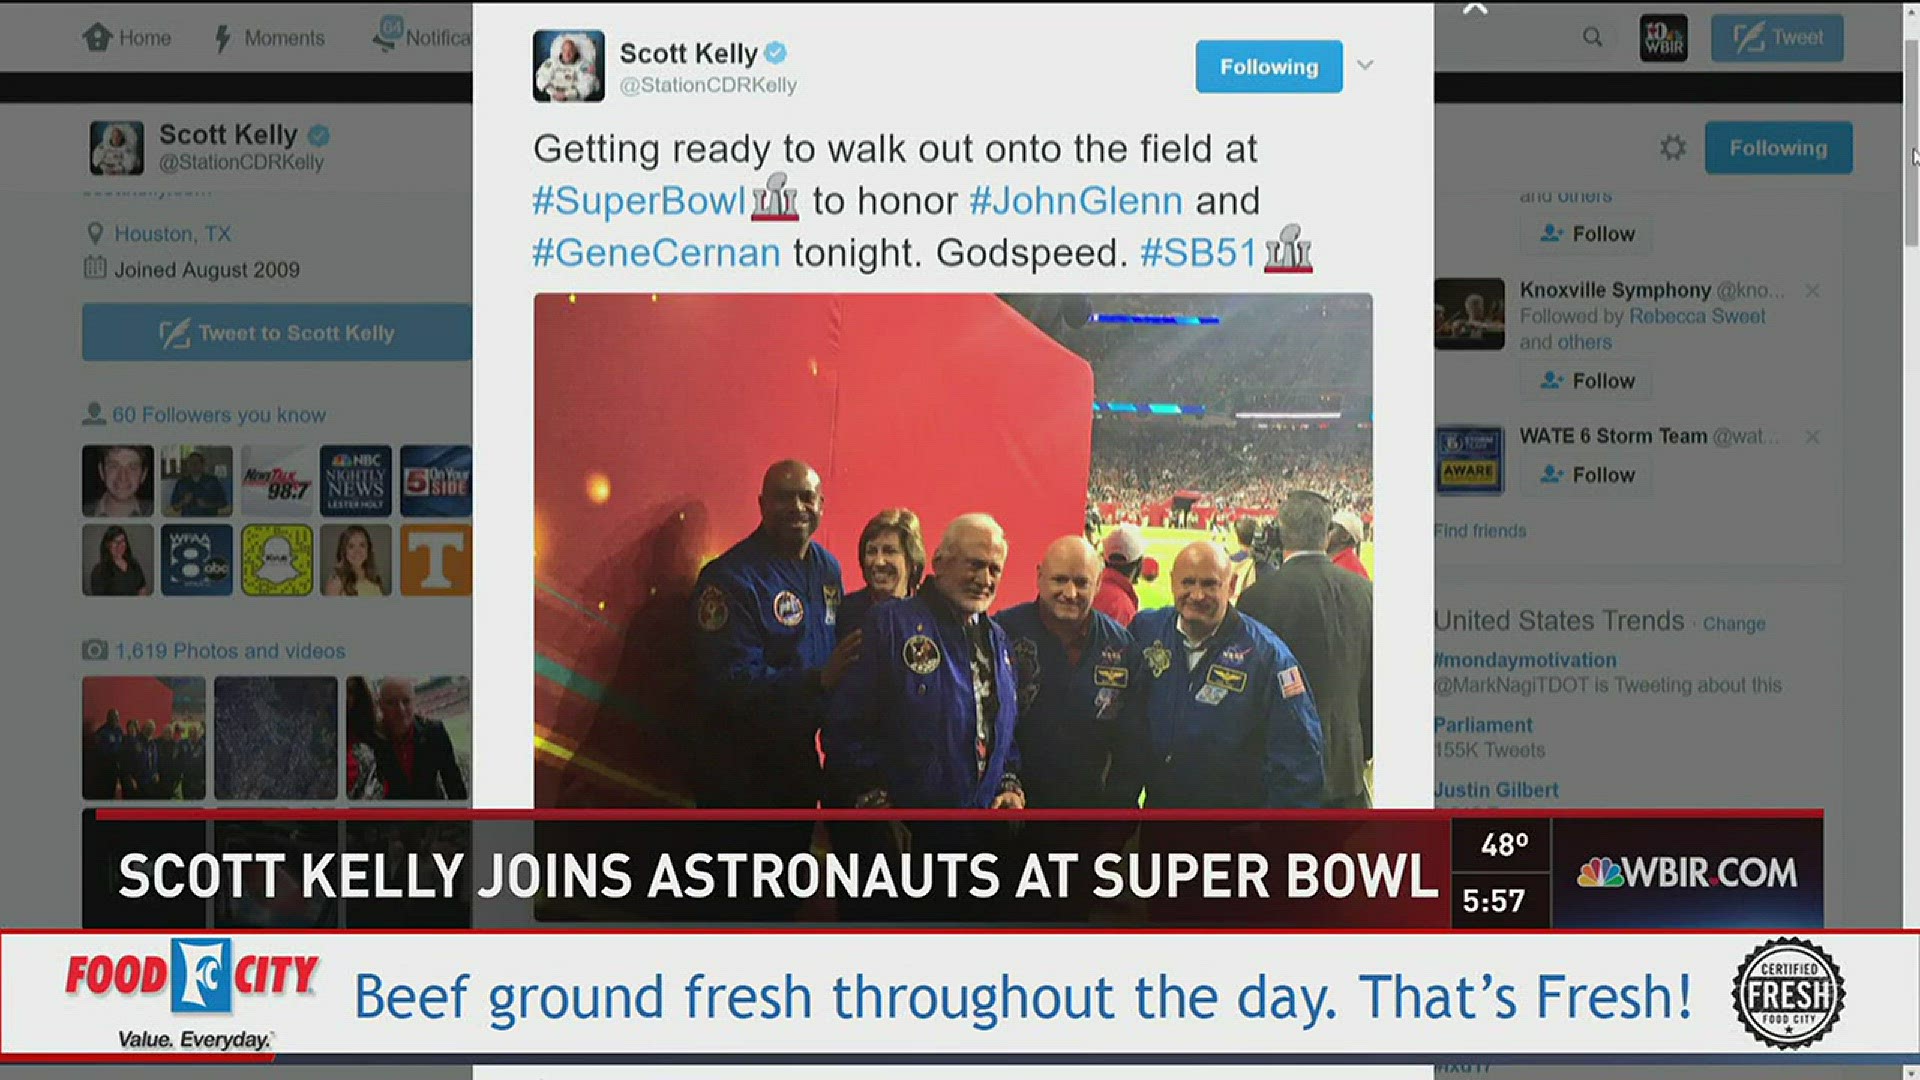 University of Tennessee grad and astronaut, Scott Kelly made an appearance at Super Bowl LI